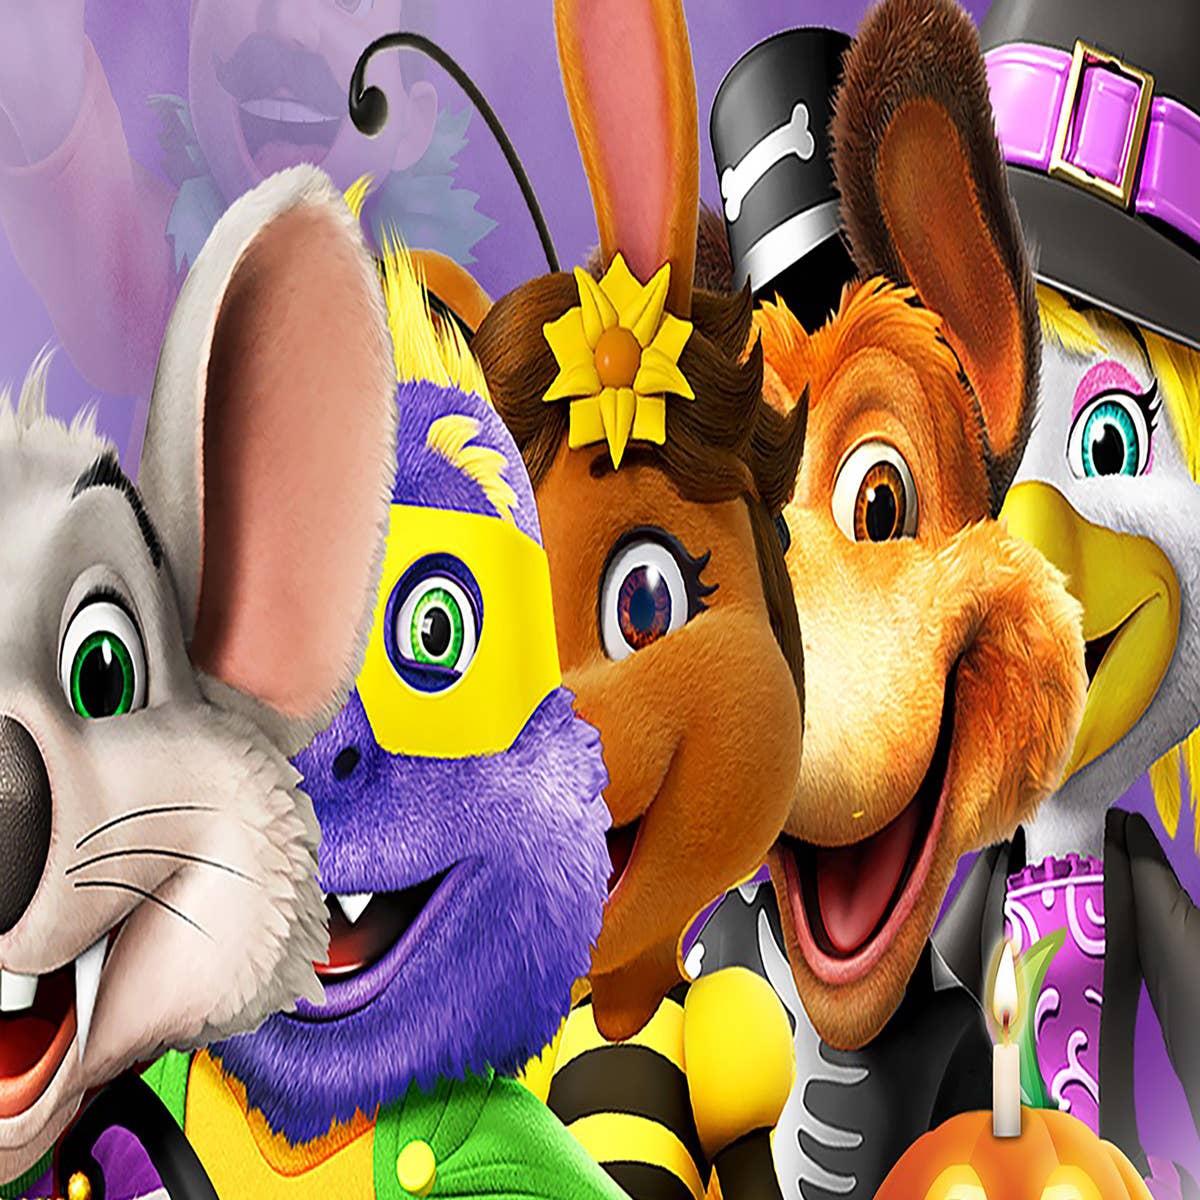 Chuck E. Cheese is tempting fate with a Five Nights at Freddy's parody  event